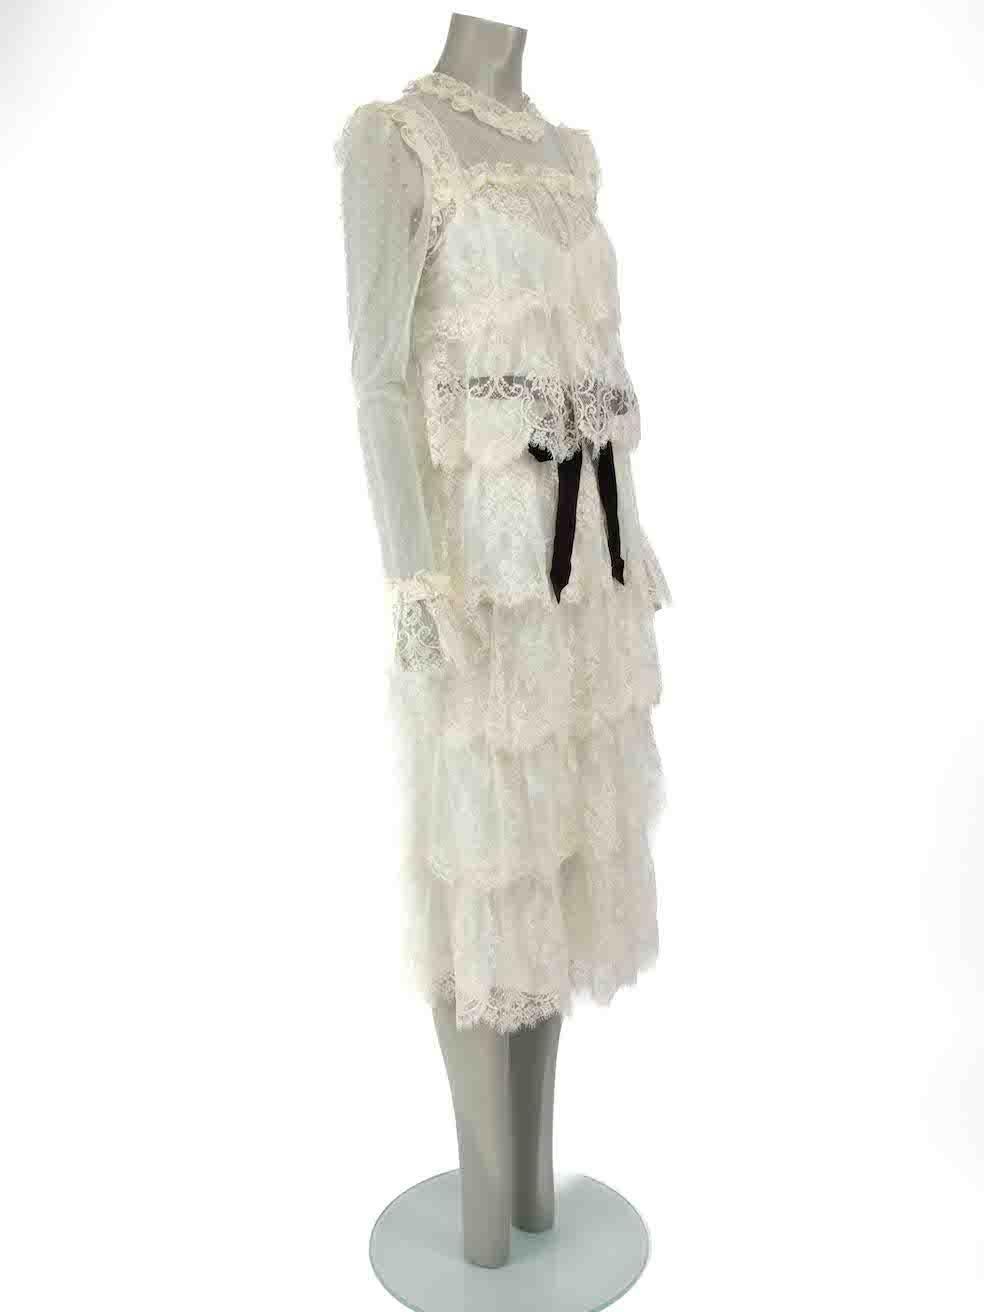 CONDITION is Never worn, with tags. No visible wear to dress is evident on this new Zimmermann designer resale item.
 
 
 
 Details
 
 
 White
 
 Lace
 
 Dress
 
 Long sleeves
 
 Round neck
 
 Front button fastening
 
 Belted
 
 Midi
 
 Slip under